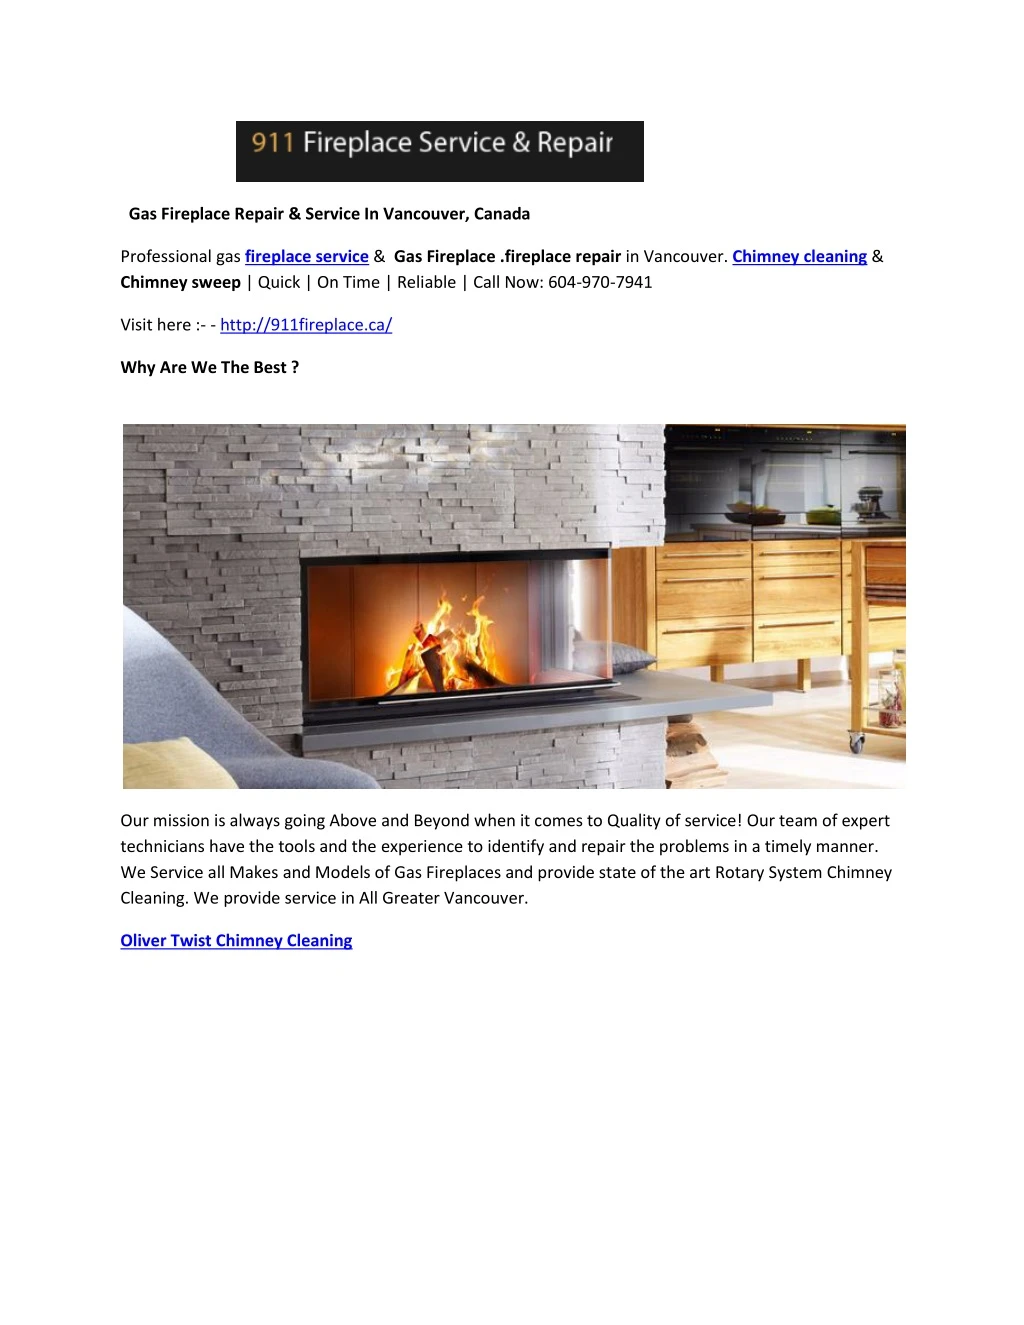 gas fireplace repair service in vancouver canada